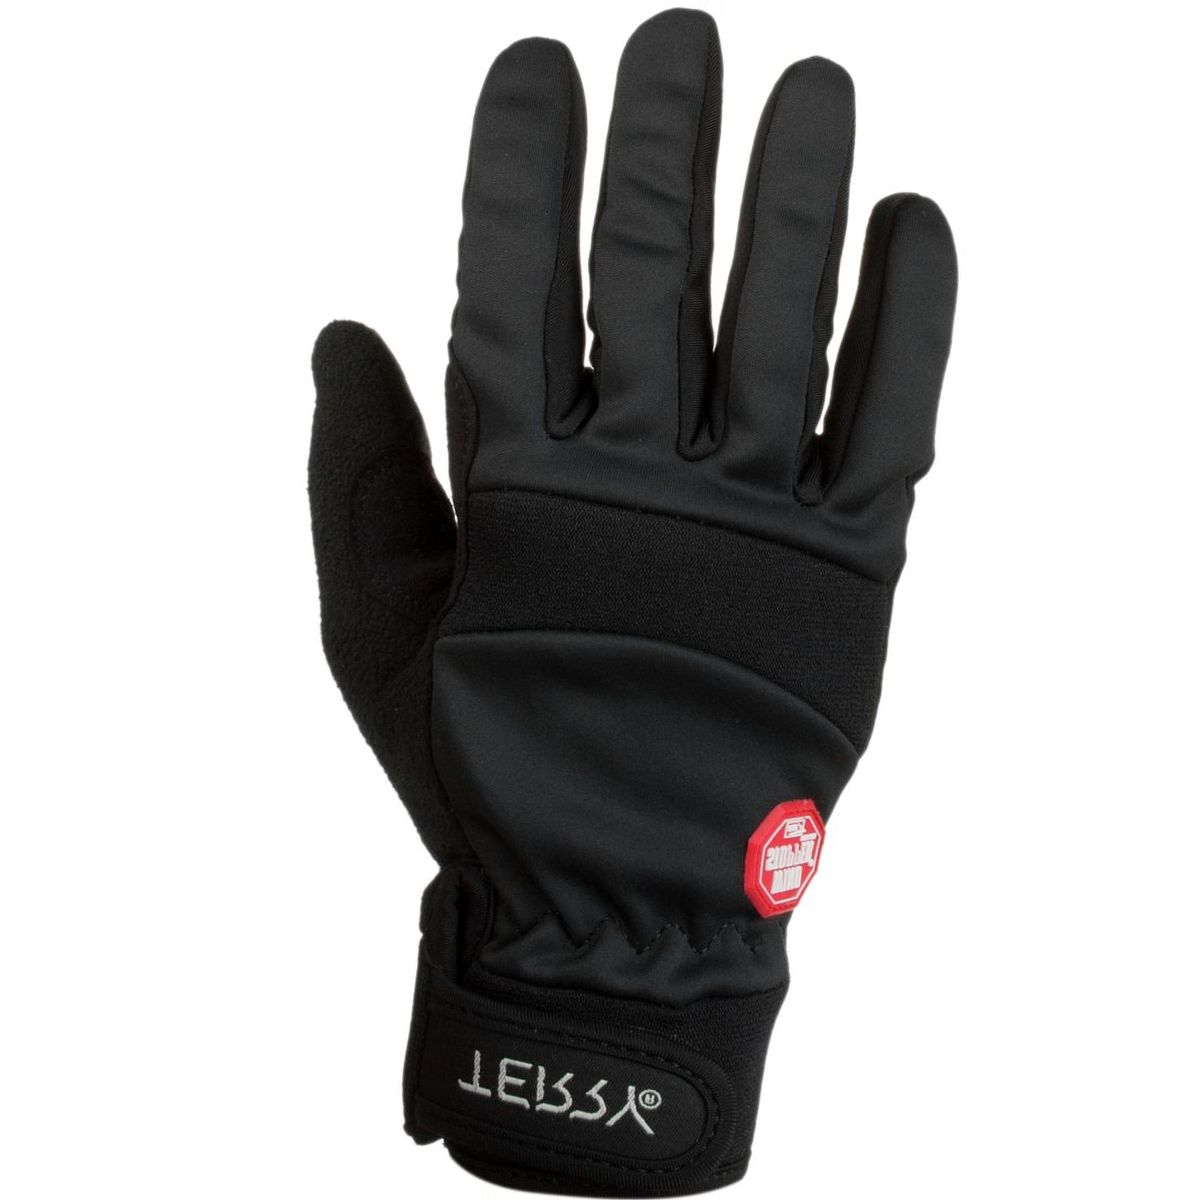 Terry Bicycles Full-Finger Windstopper Glove - Women's